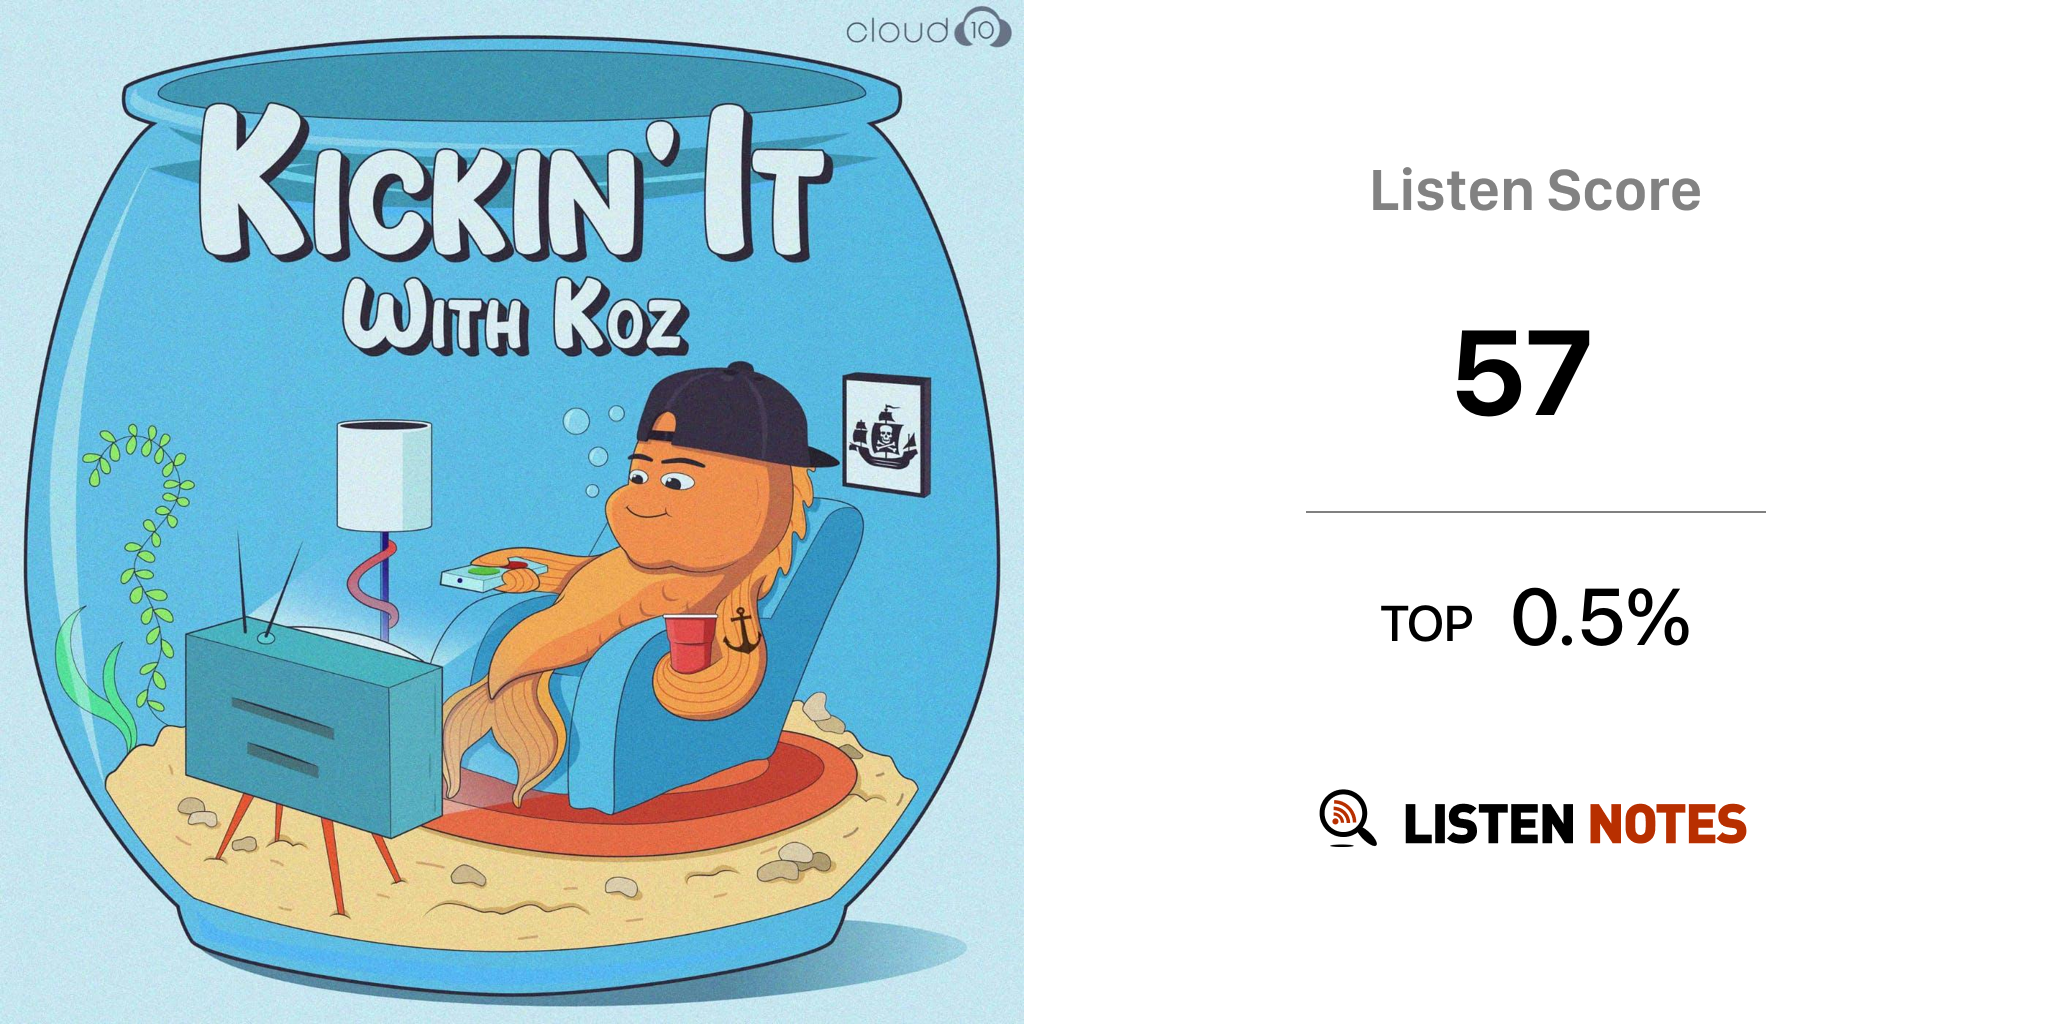 Kickin' it with Koz (podcast) - Cloud10 and iHeartPodcasts | Listen Notes